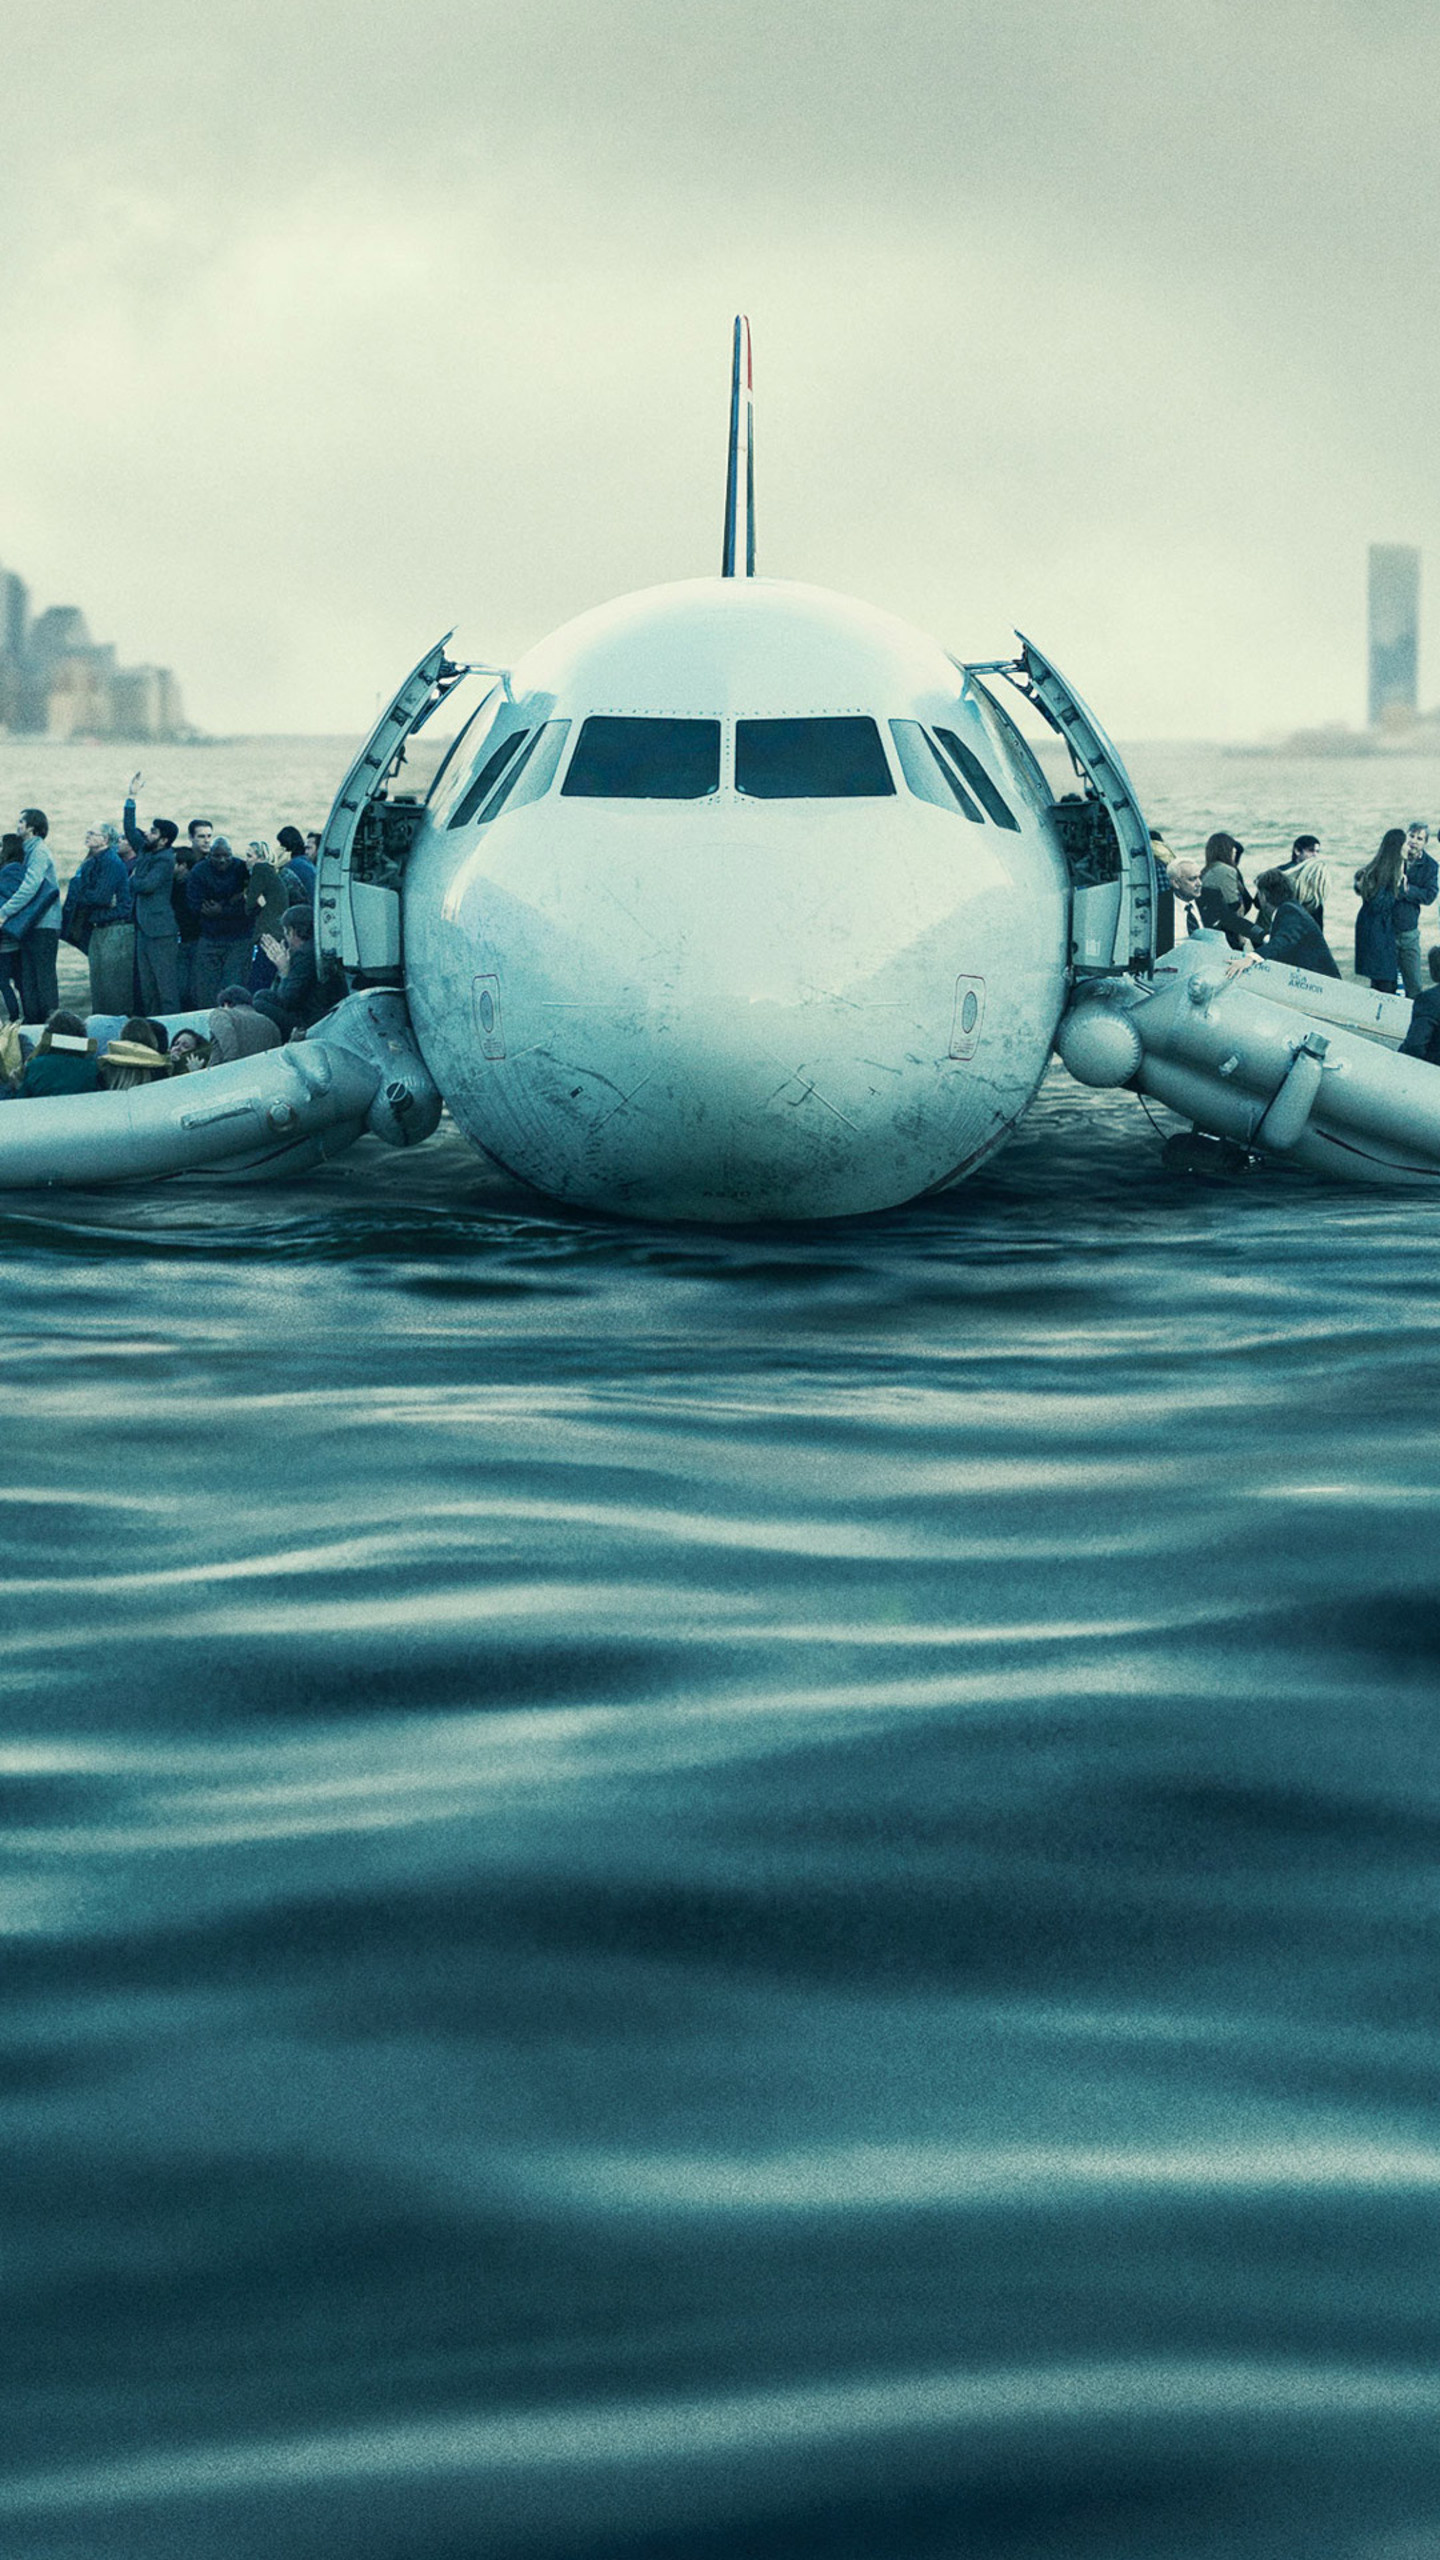 Sully movie, Galaxy S6 and S7 wallpapers, Inspiring story, HD images, 1440x2560 HD Handy